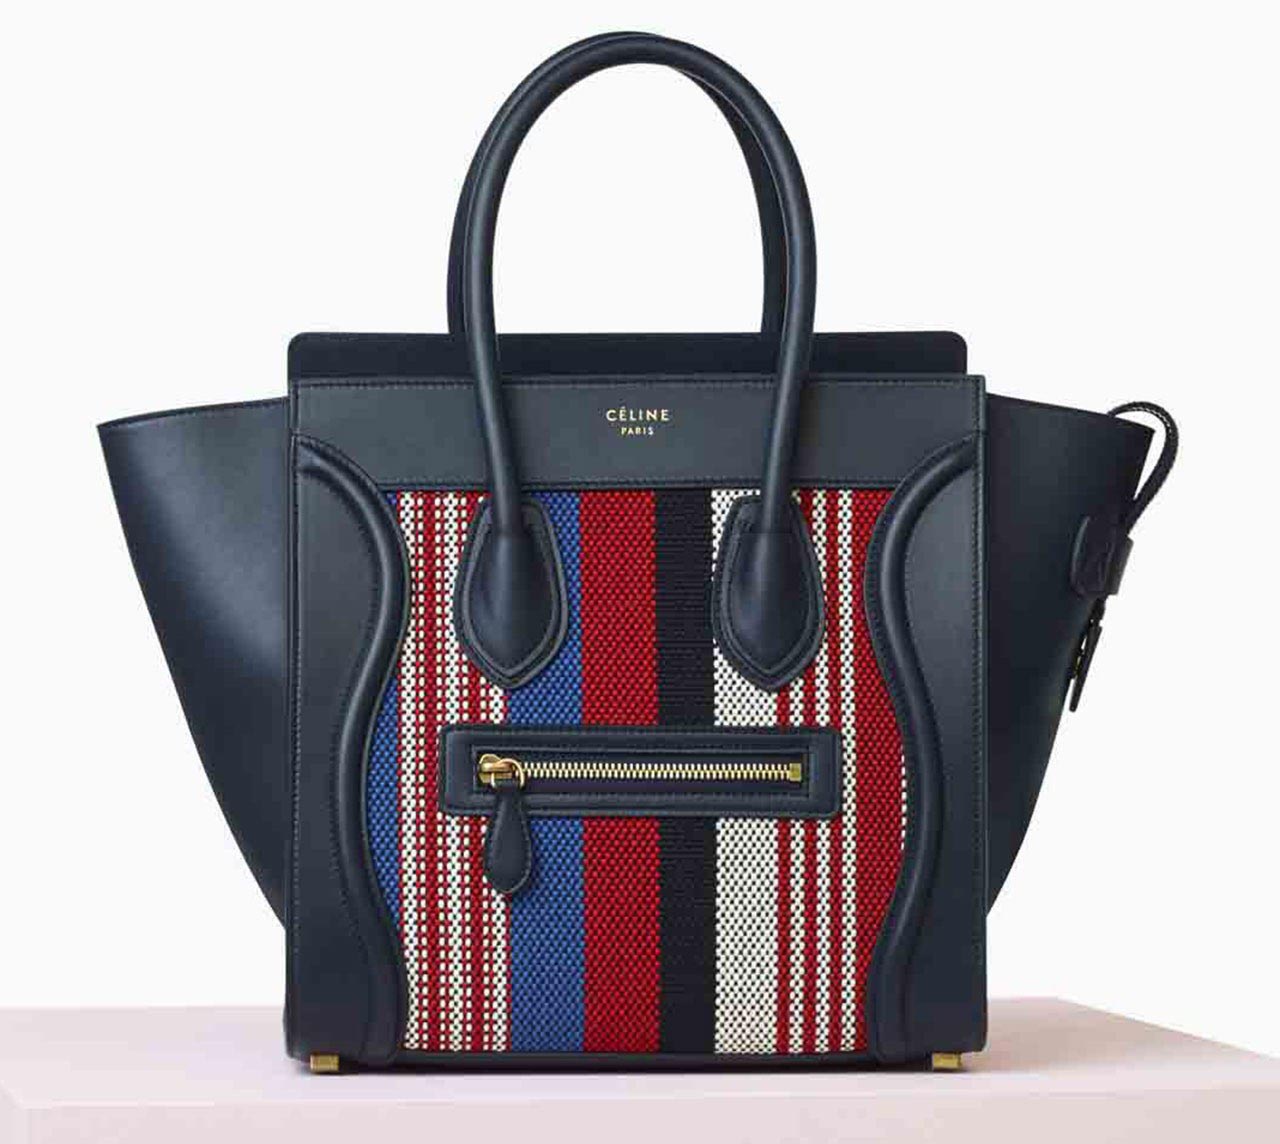 After originally applying for legal copyright protection of its infamous Luggage Tote, Celine has been awarded the Trade Dress protection, a reference to the characteristics of the visual appearance of a product or its packaging that communicate to consumers its origin. Protection of the shape and appearance will hopefully deter counterfeiters.  